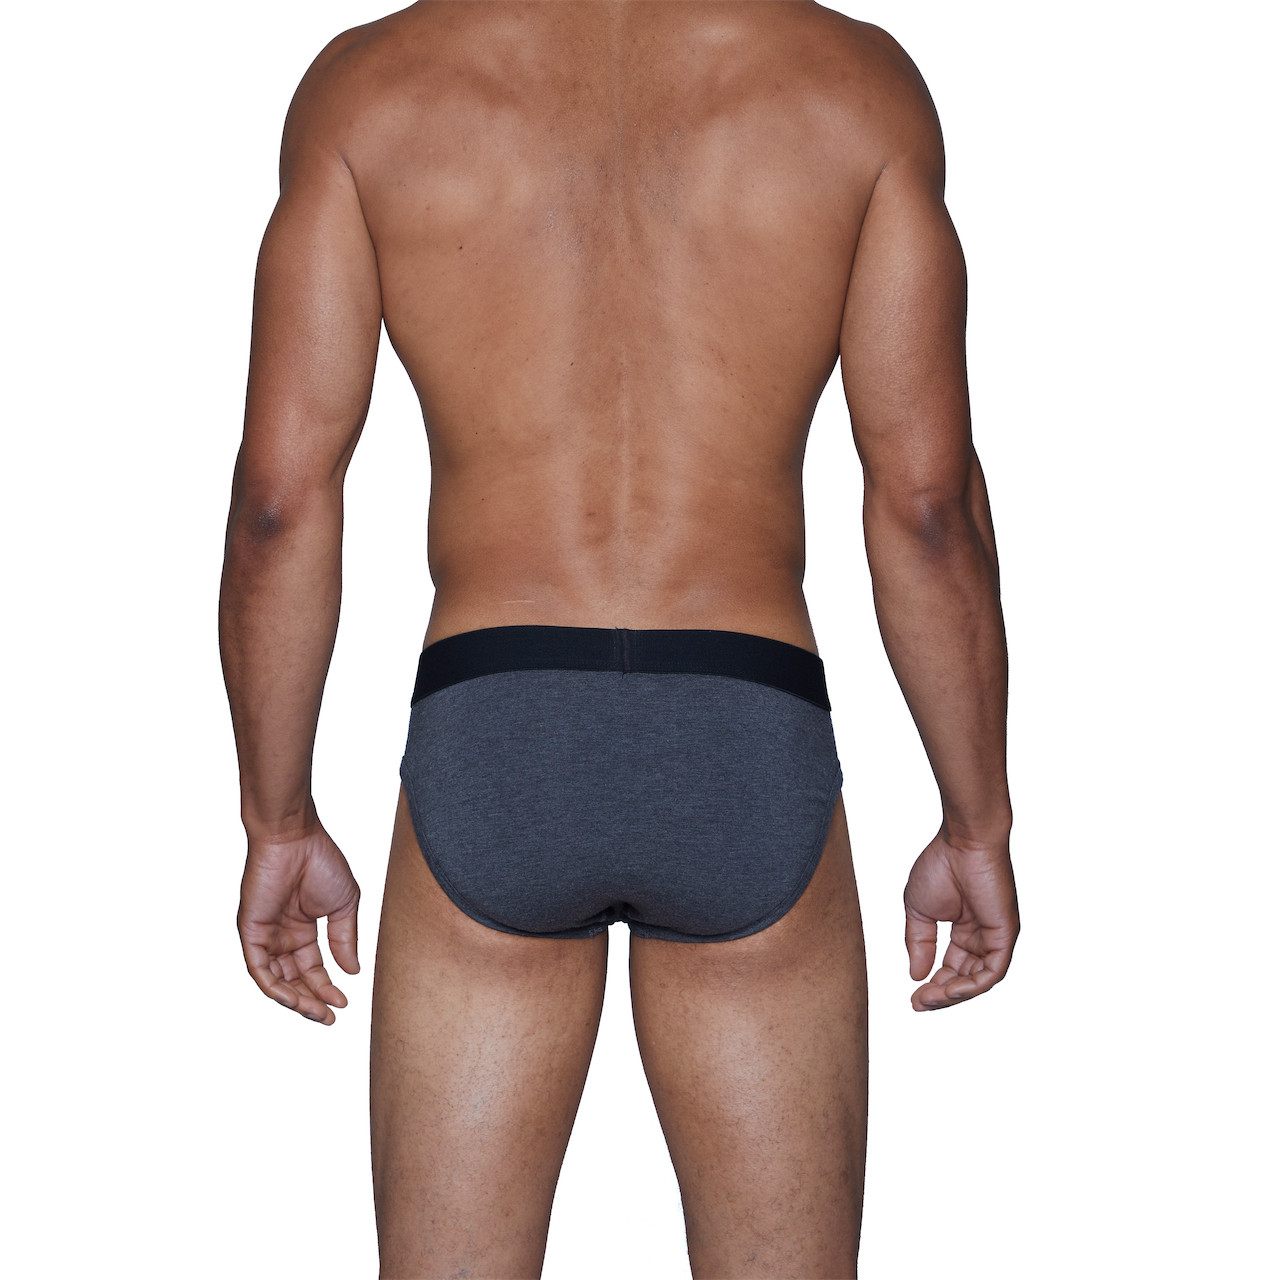 Hip Brief - Charcoal Heather